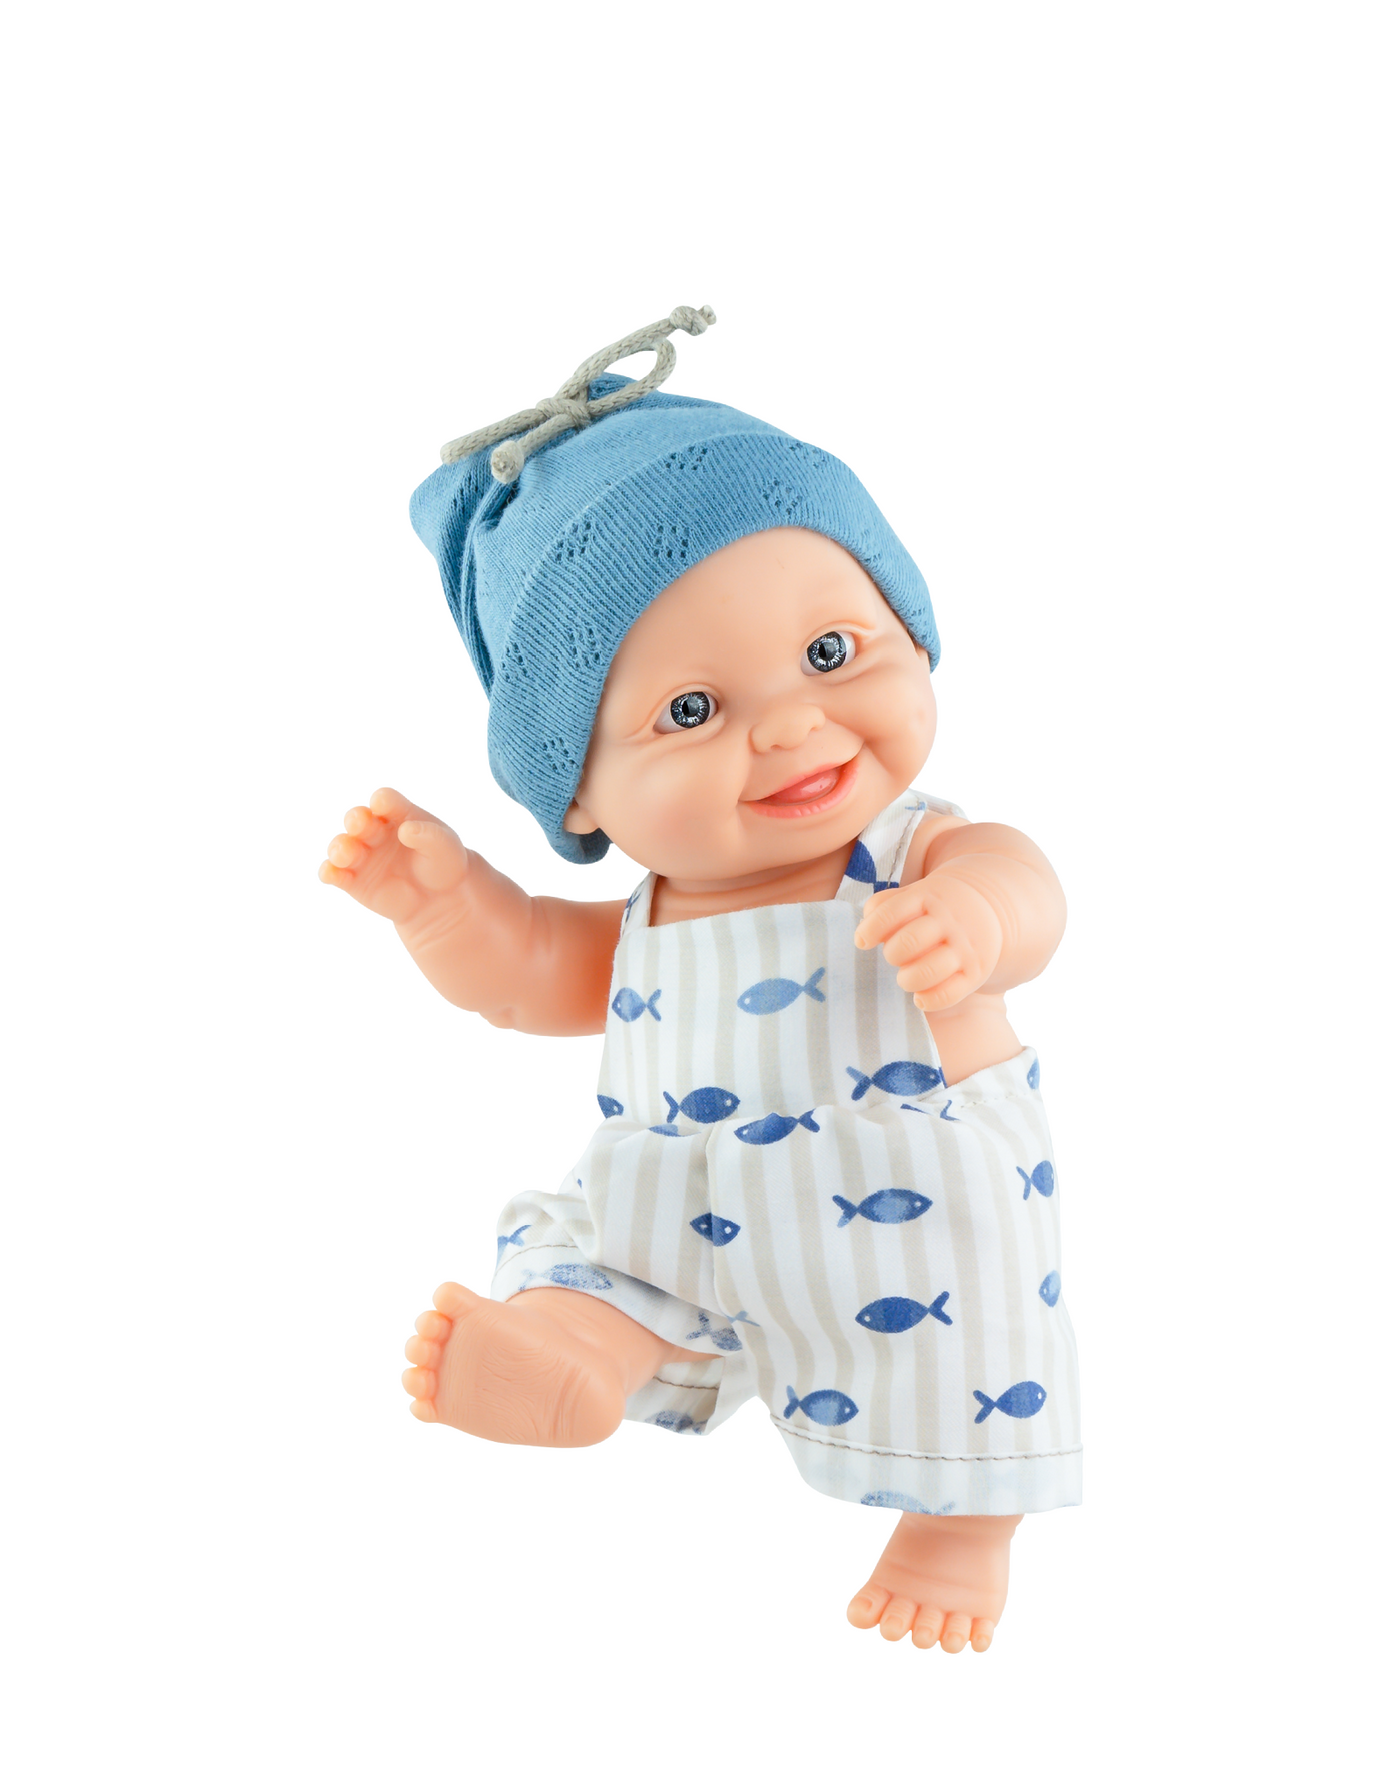 Peques doll - Teo with fish overalls and blue hat - Paola Reina